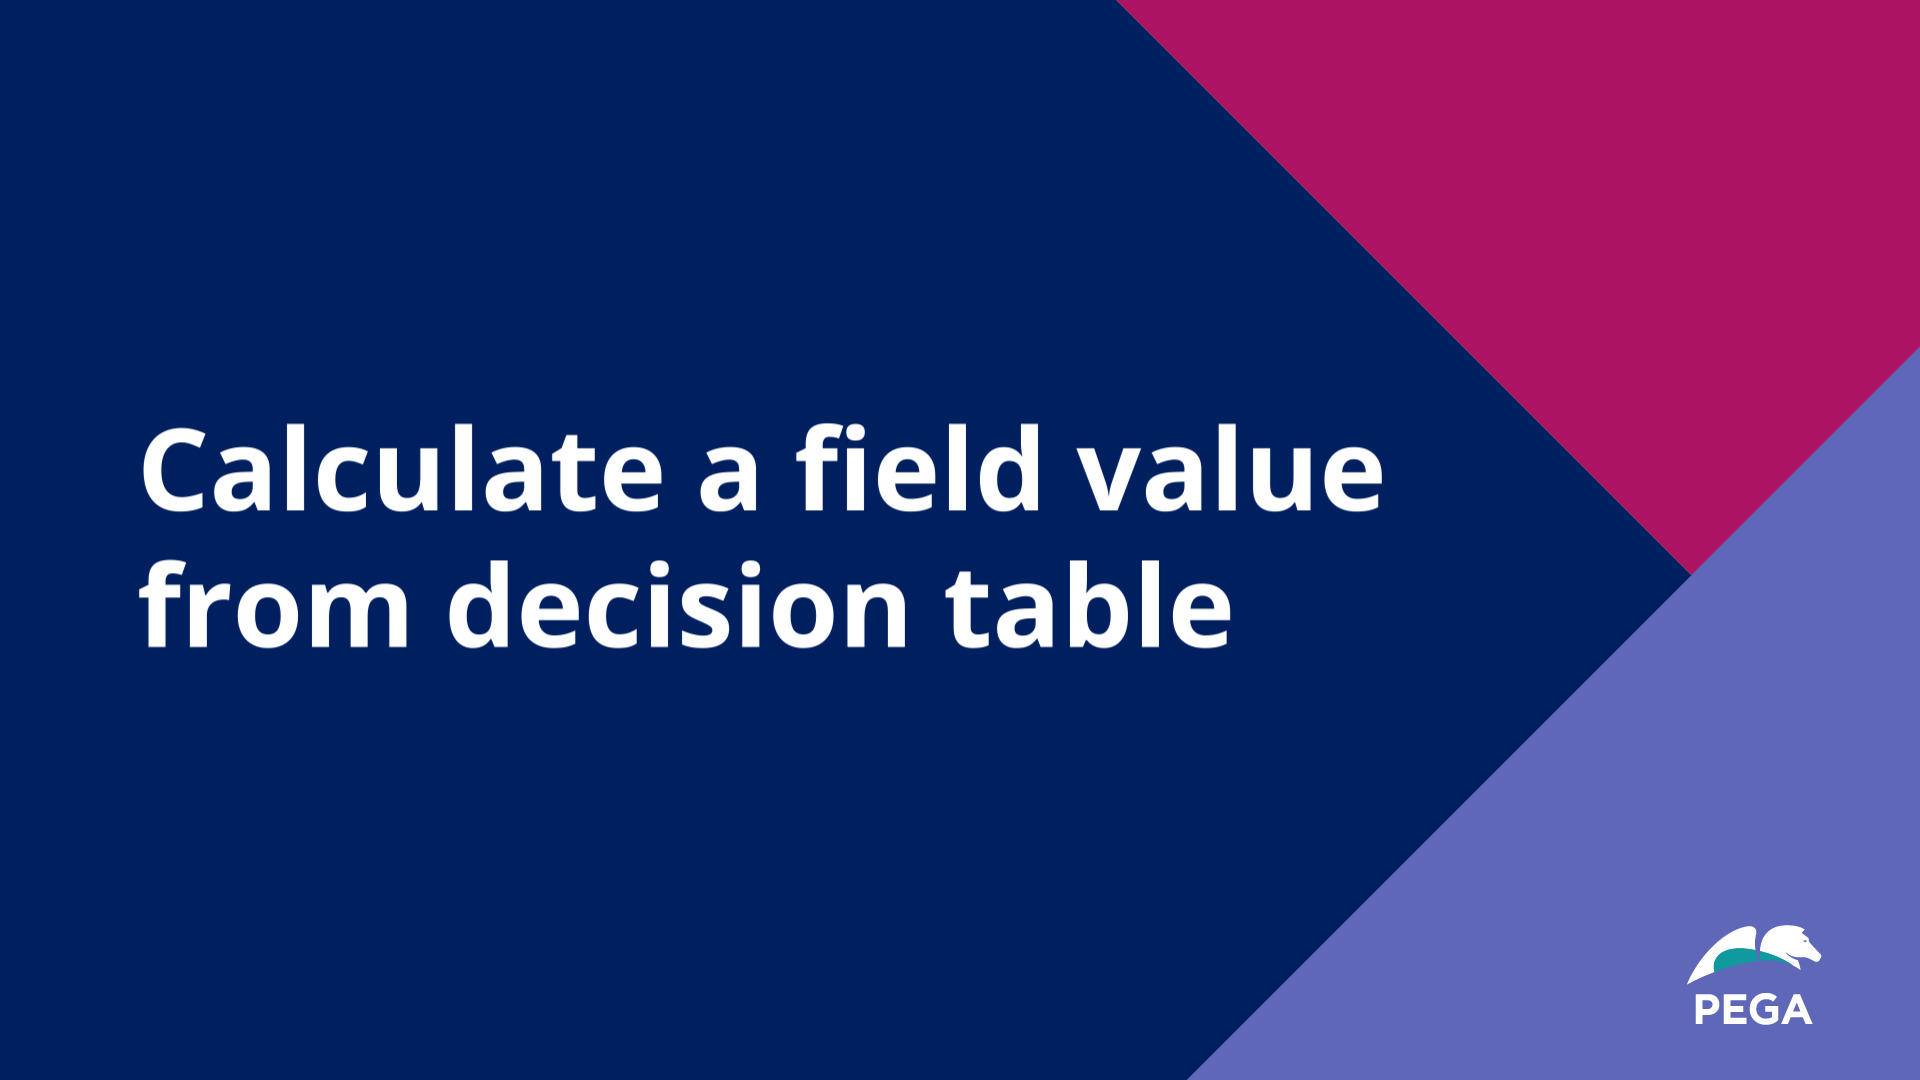 Calculate a field value from decision table